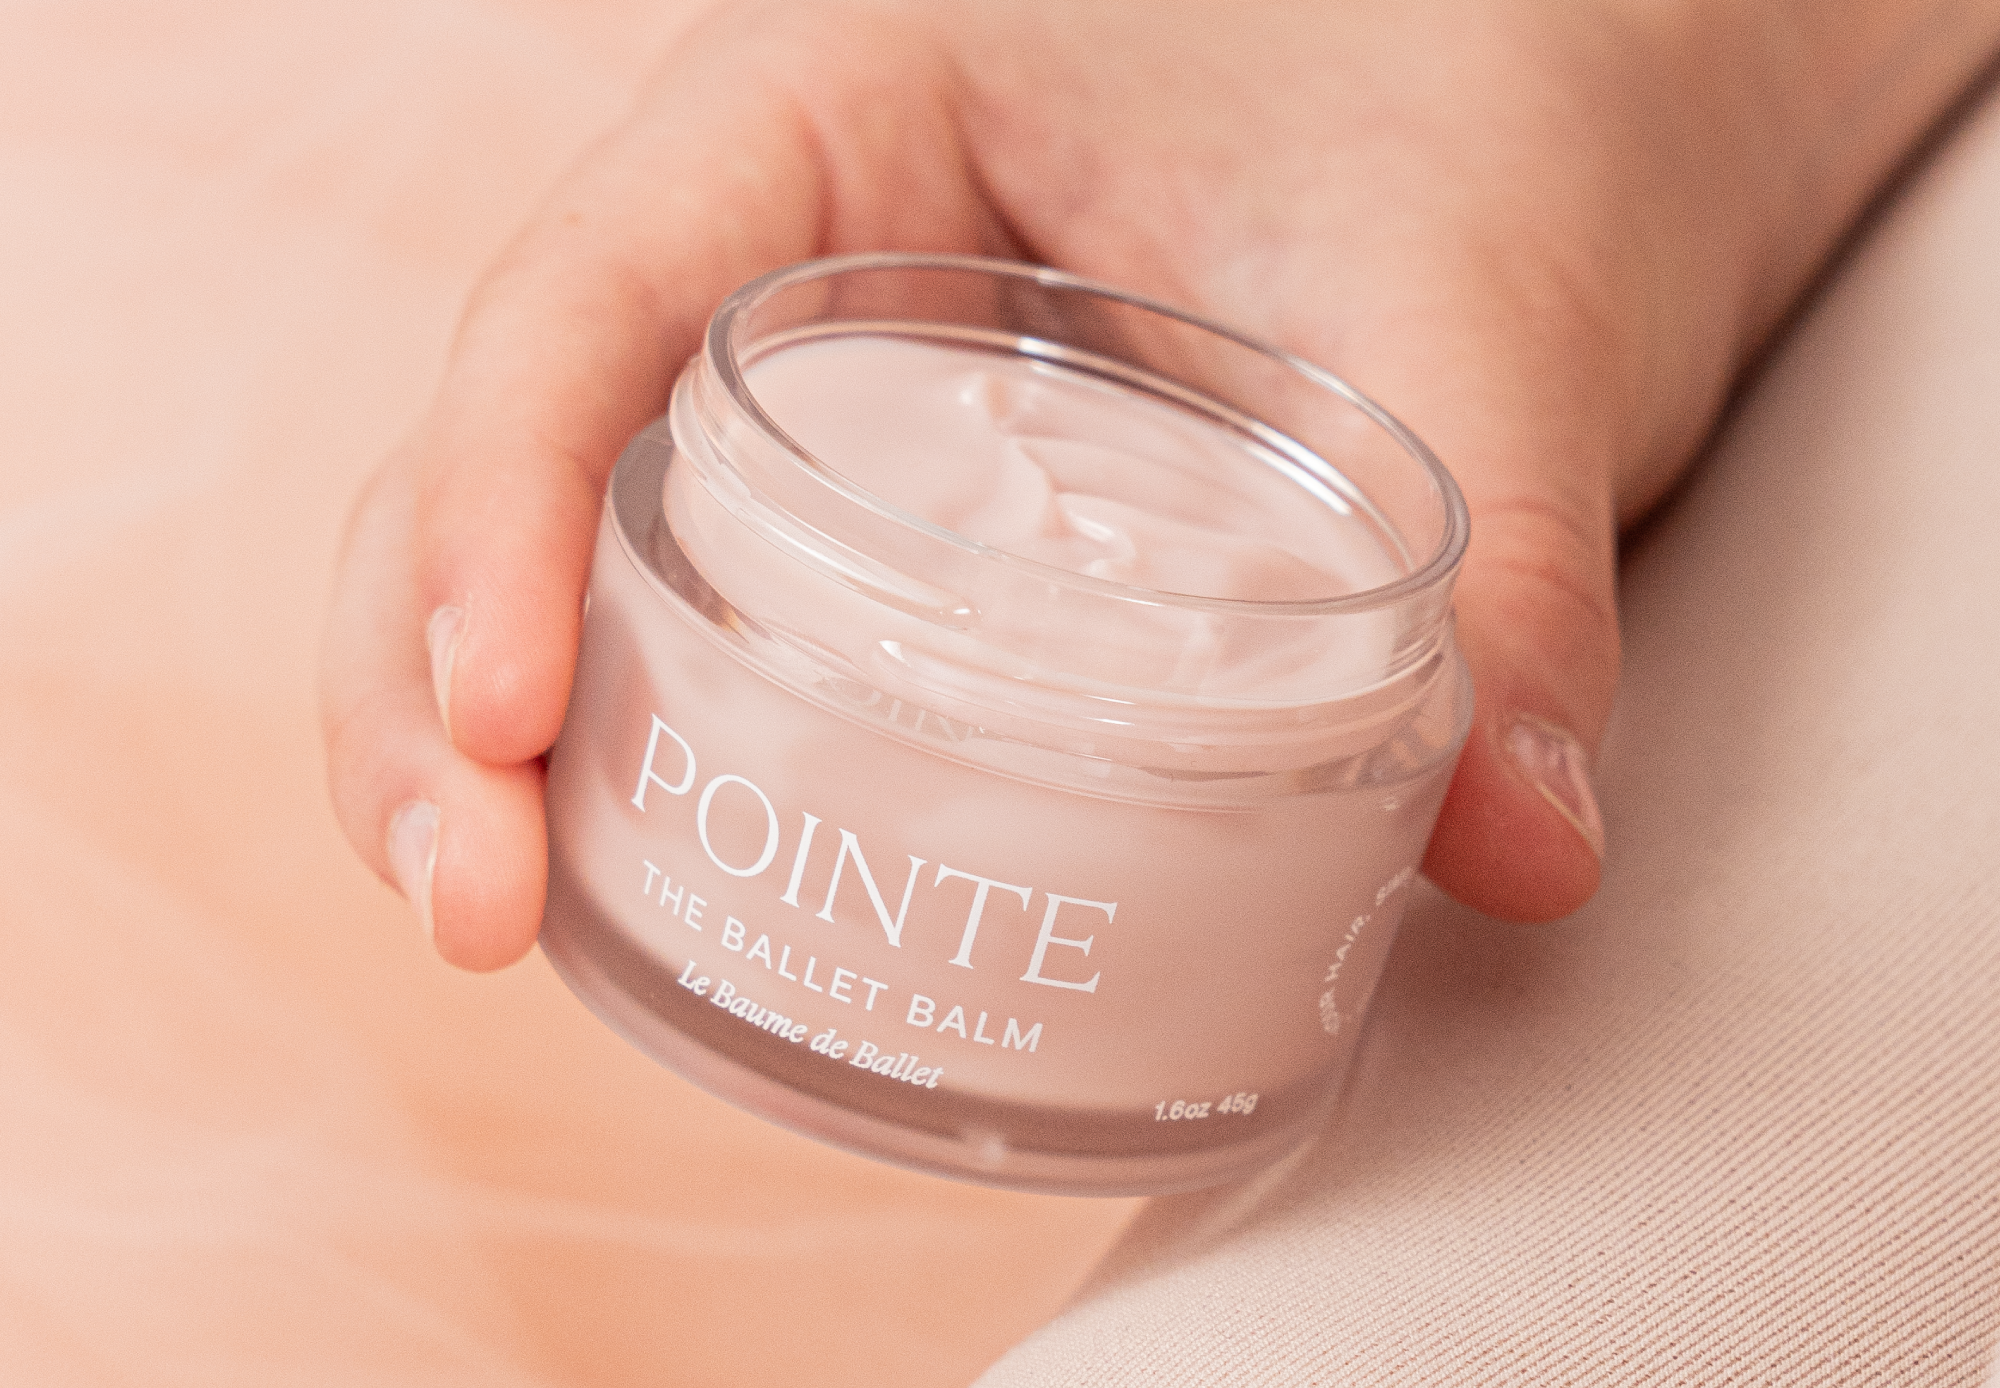 The Magic Behind Pointe Hair Co: Our formulation and ingredients